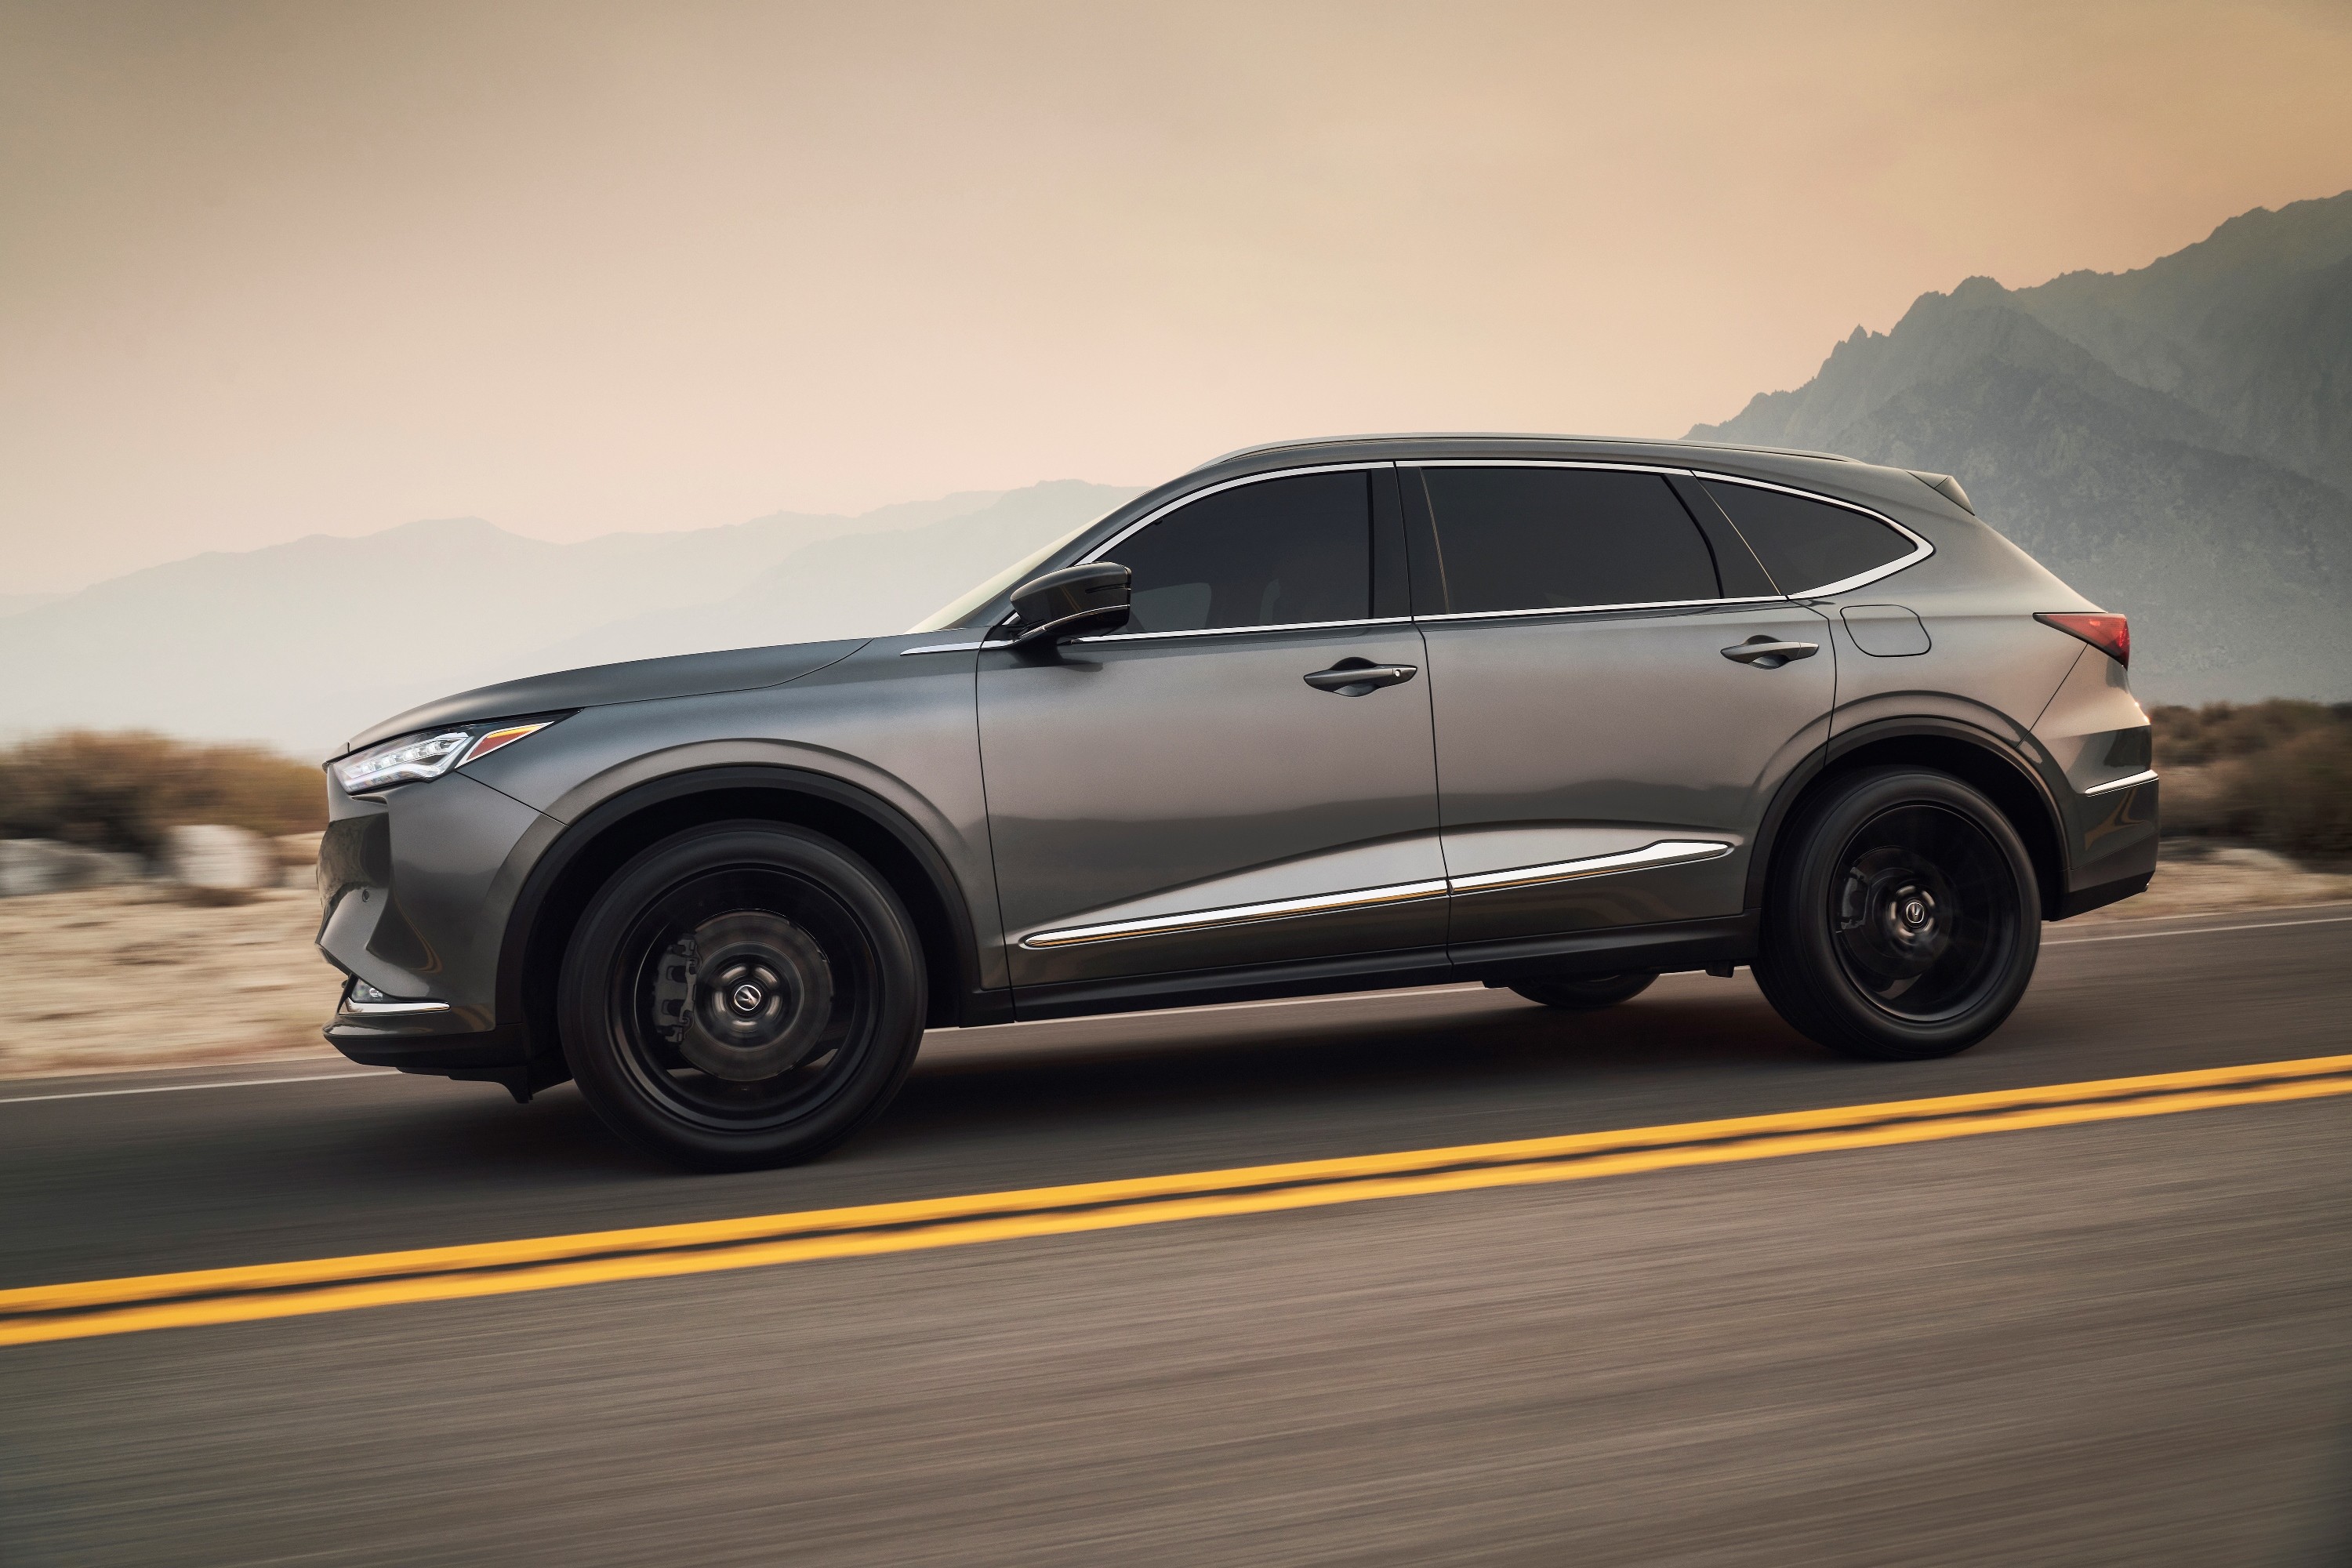 Acura Describes 2022 Mdx Luxury Suv As The New Brand Flagship 2 